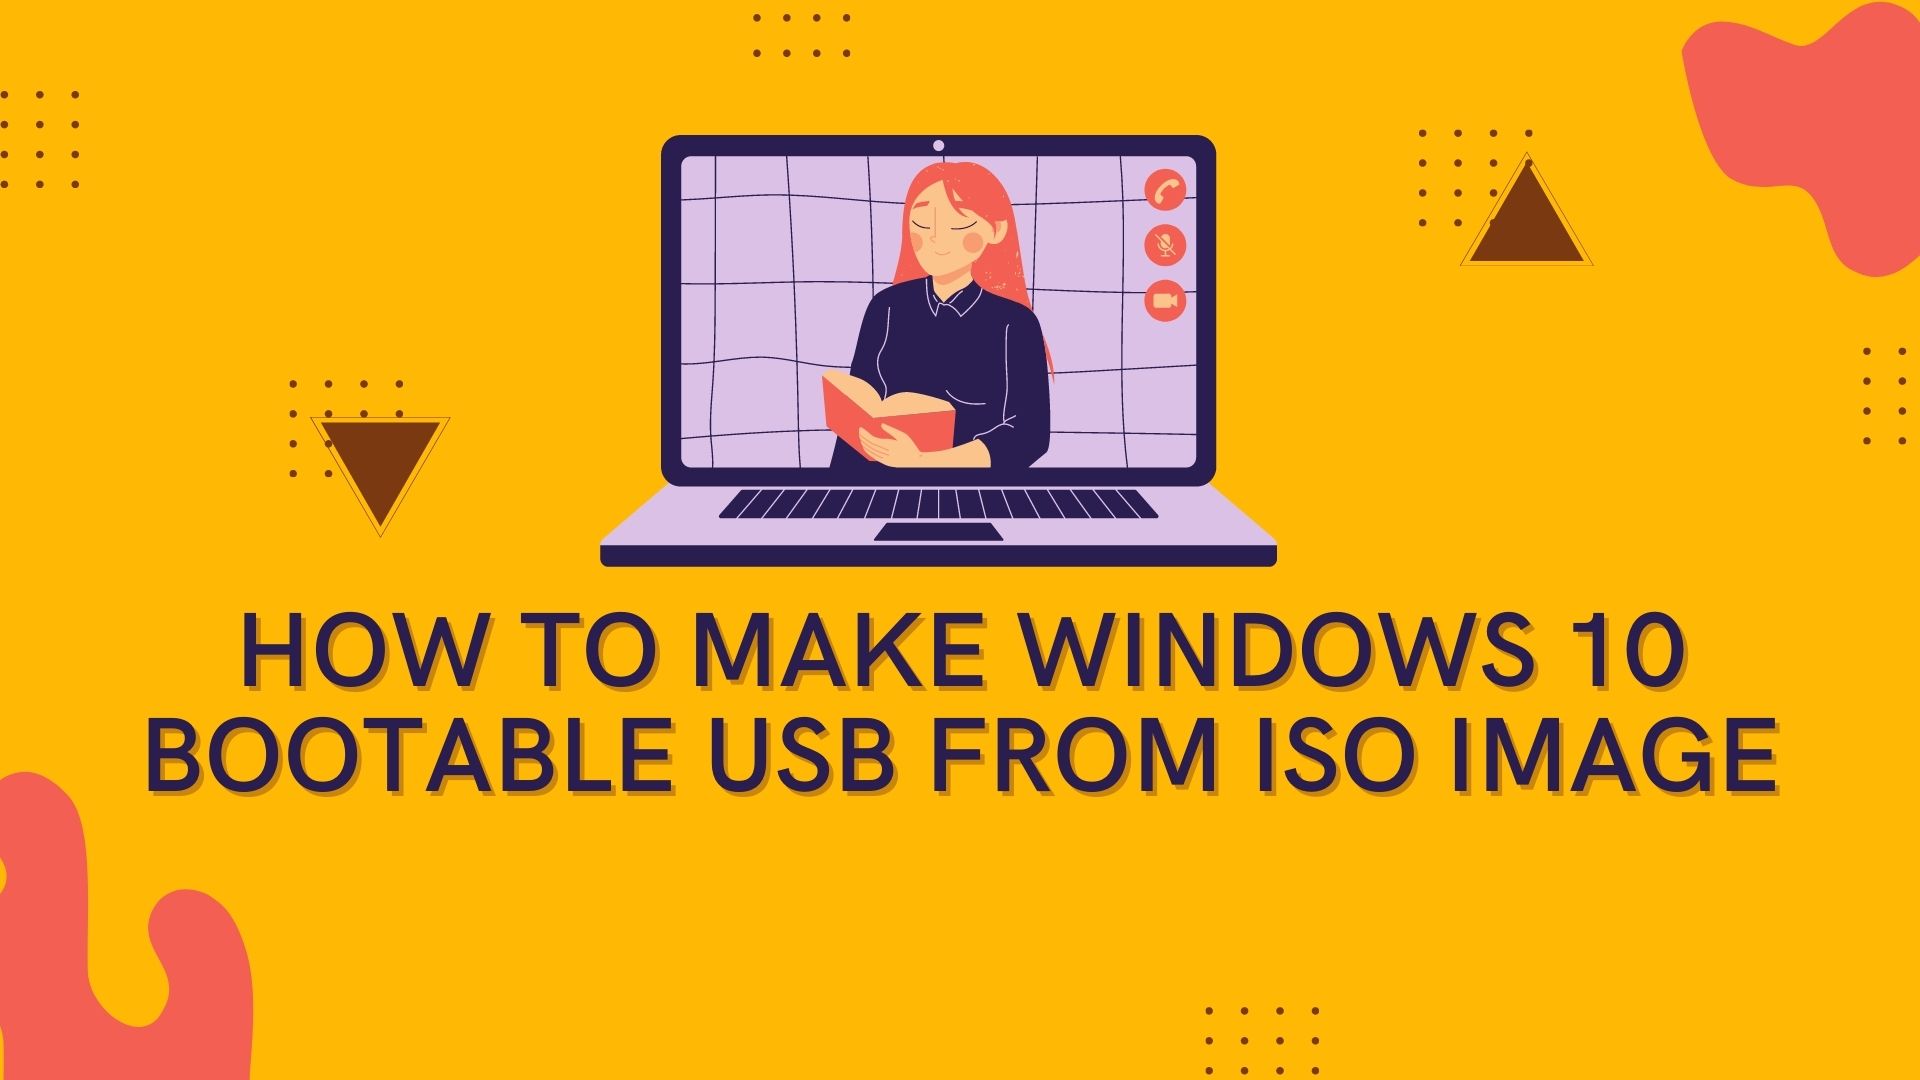 How To Make Windows 10 Bootable USB from ISO Image